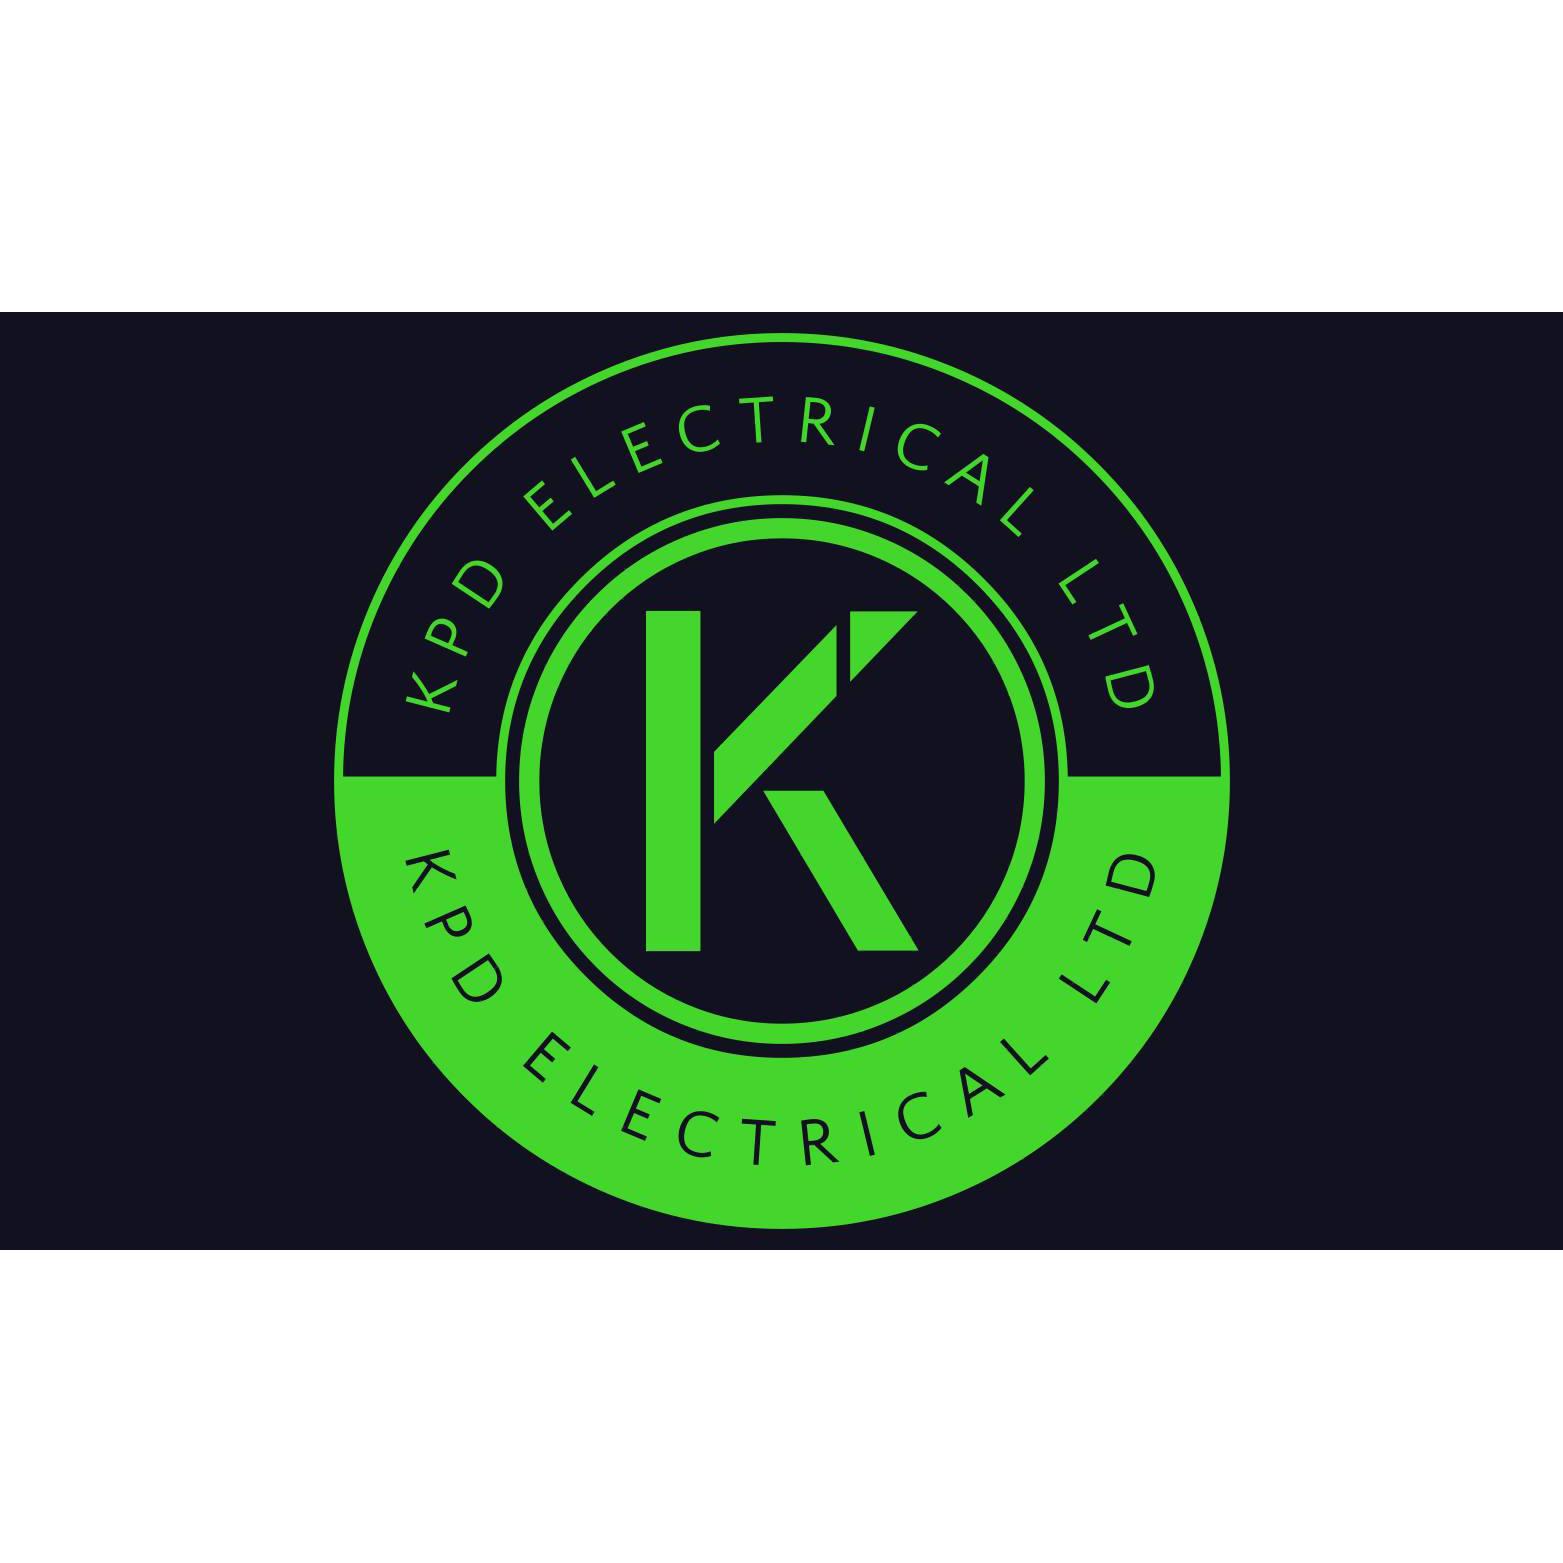 KPD Electrical Ltd - Staines-Upon-Thames, Surrey TW18 1DW - 07808 509035 | ShowMeLocal.com